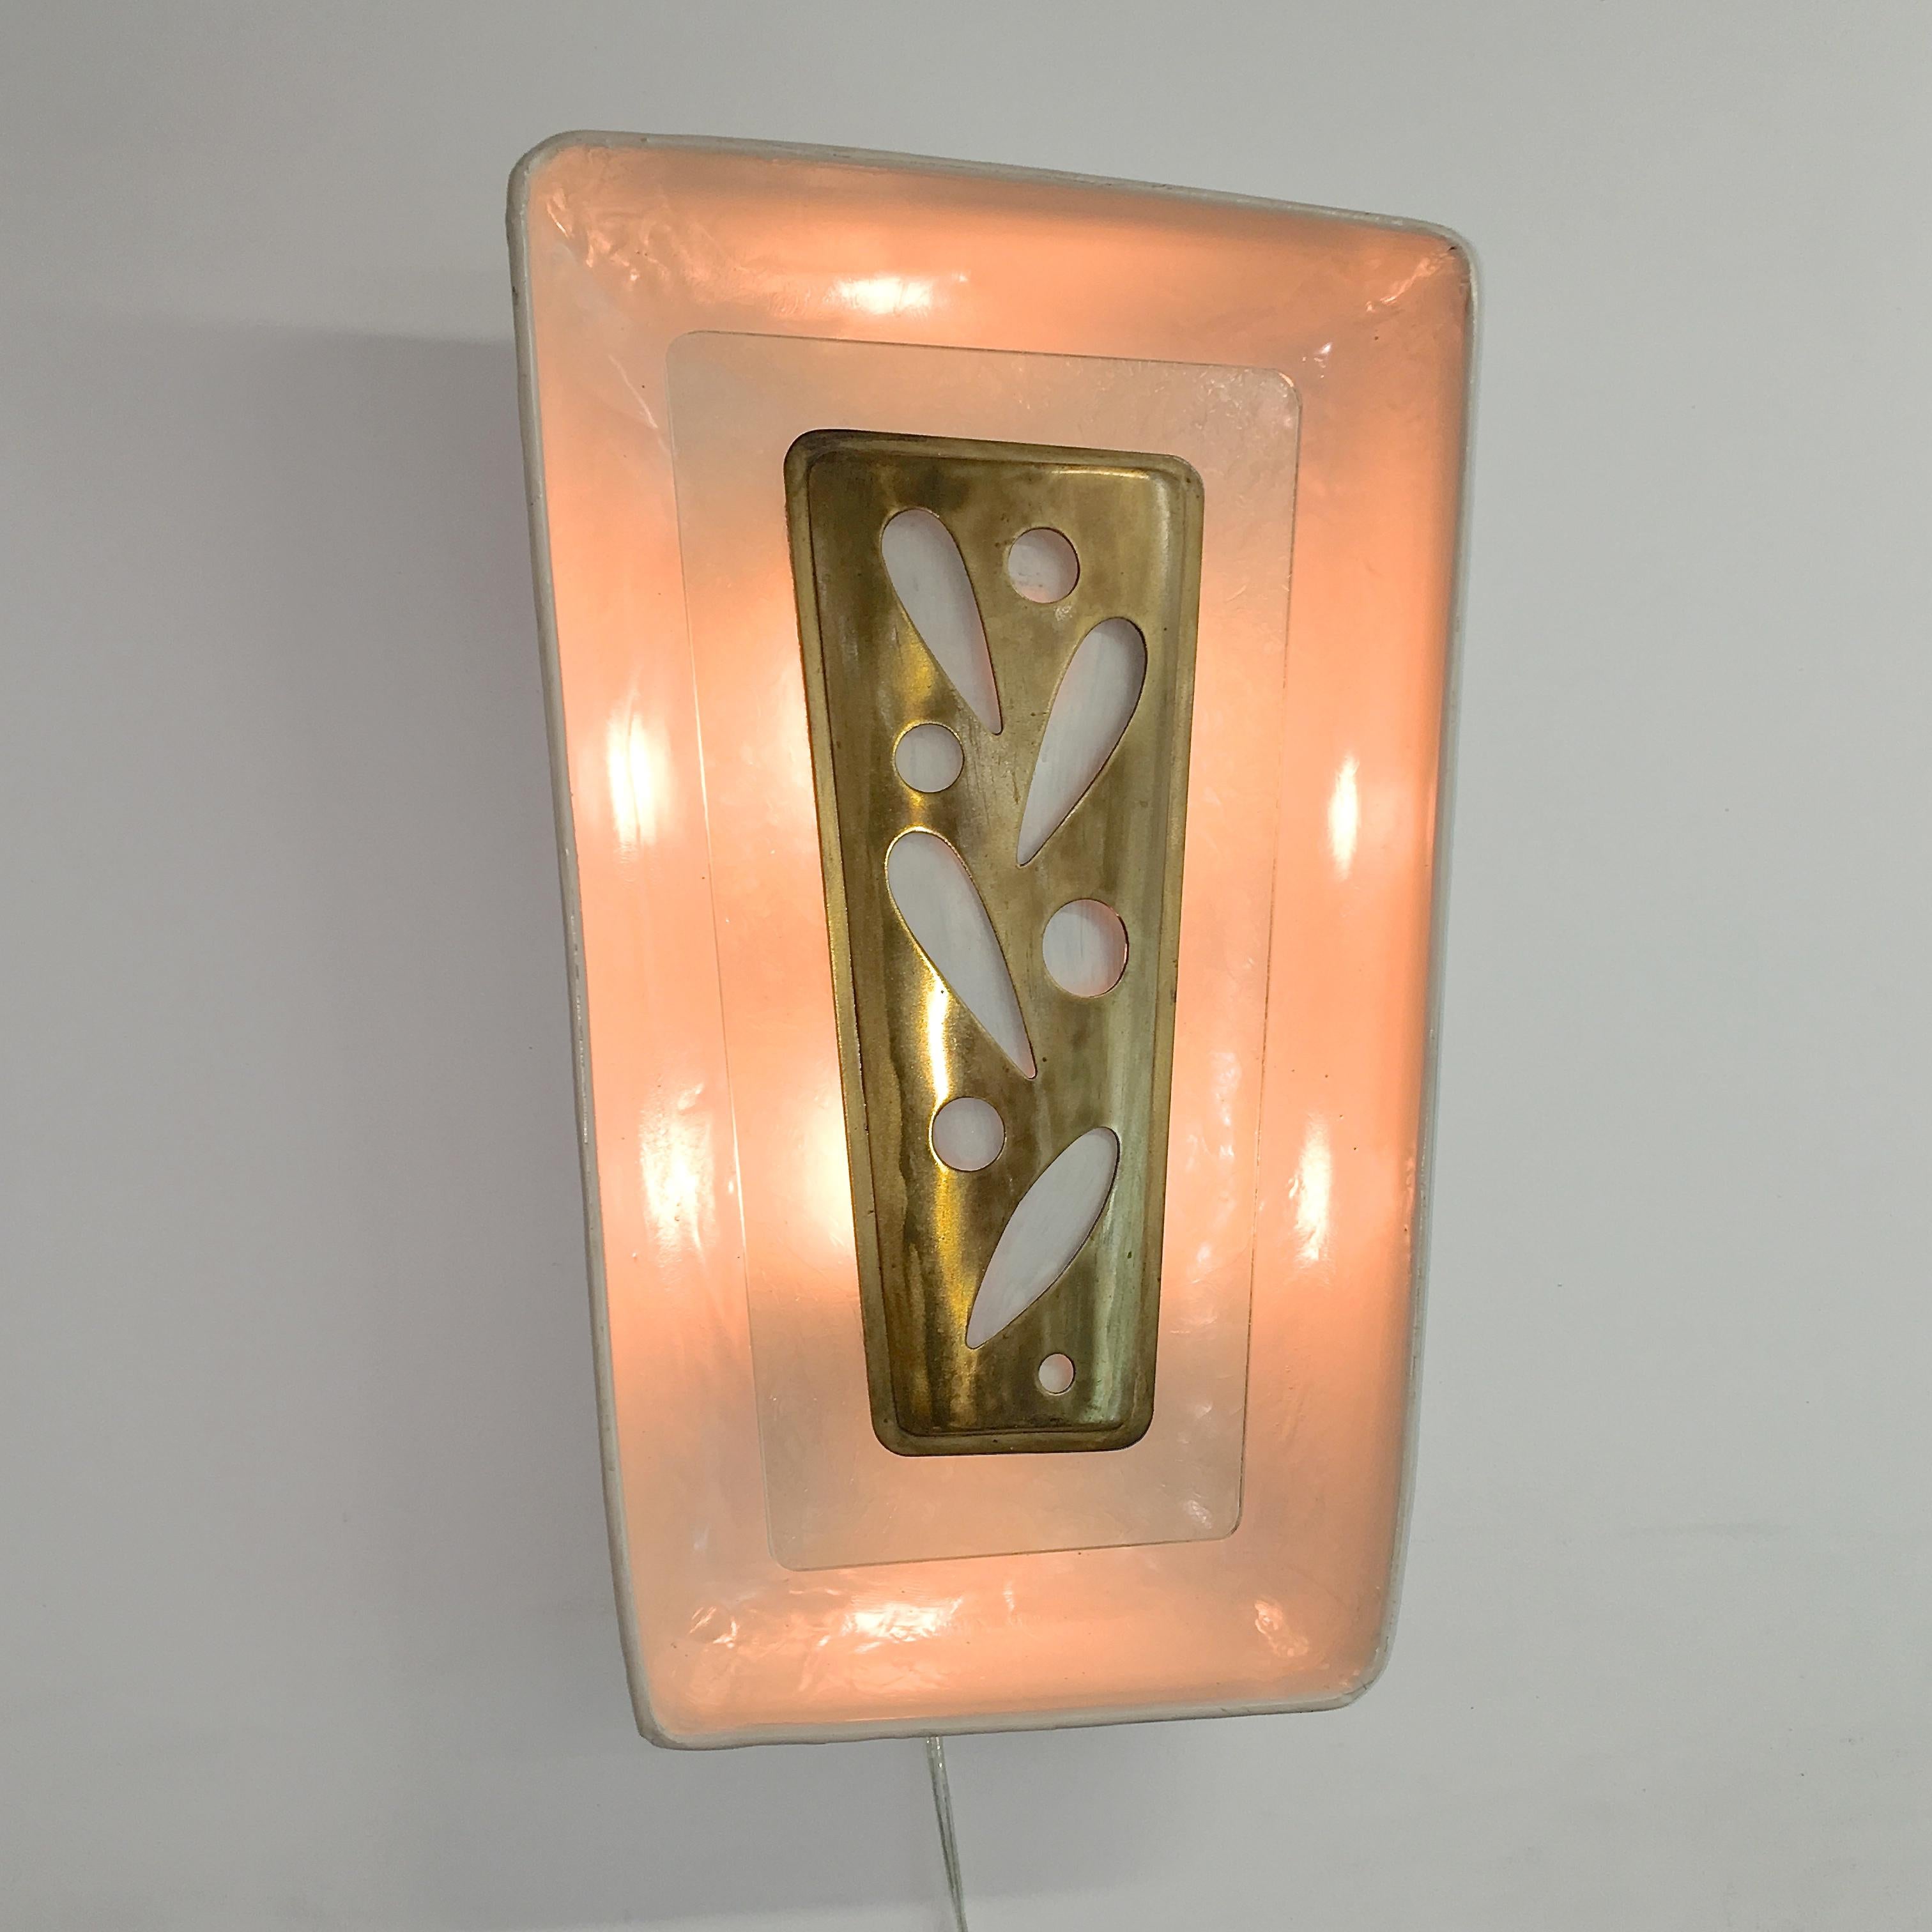 Gio Ponti Wall Sconce from the m/s Augustus Italian Ocean Liner 1951 For Sale 4